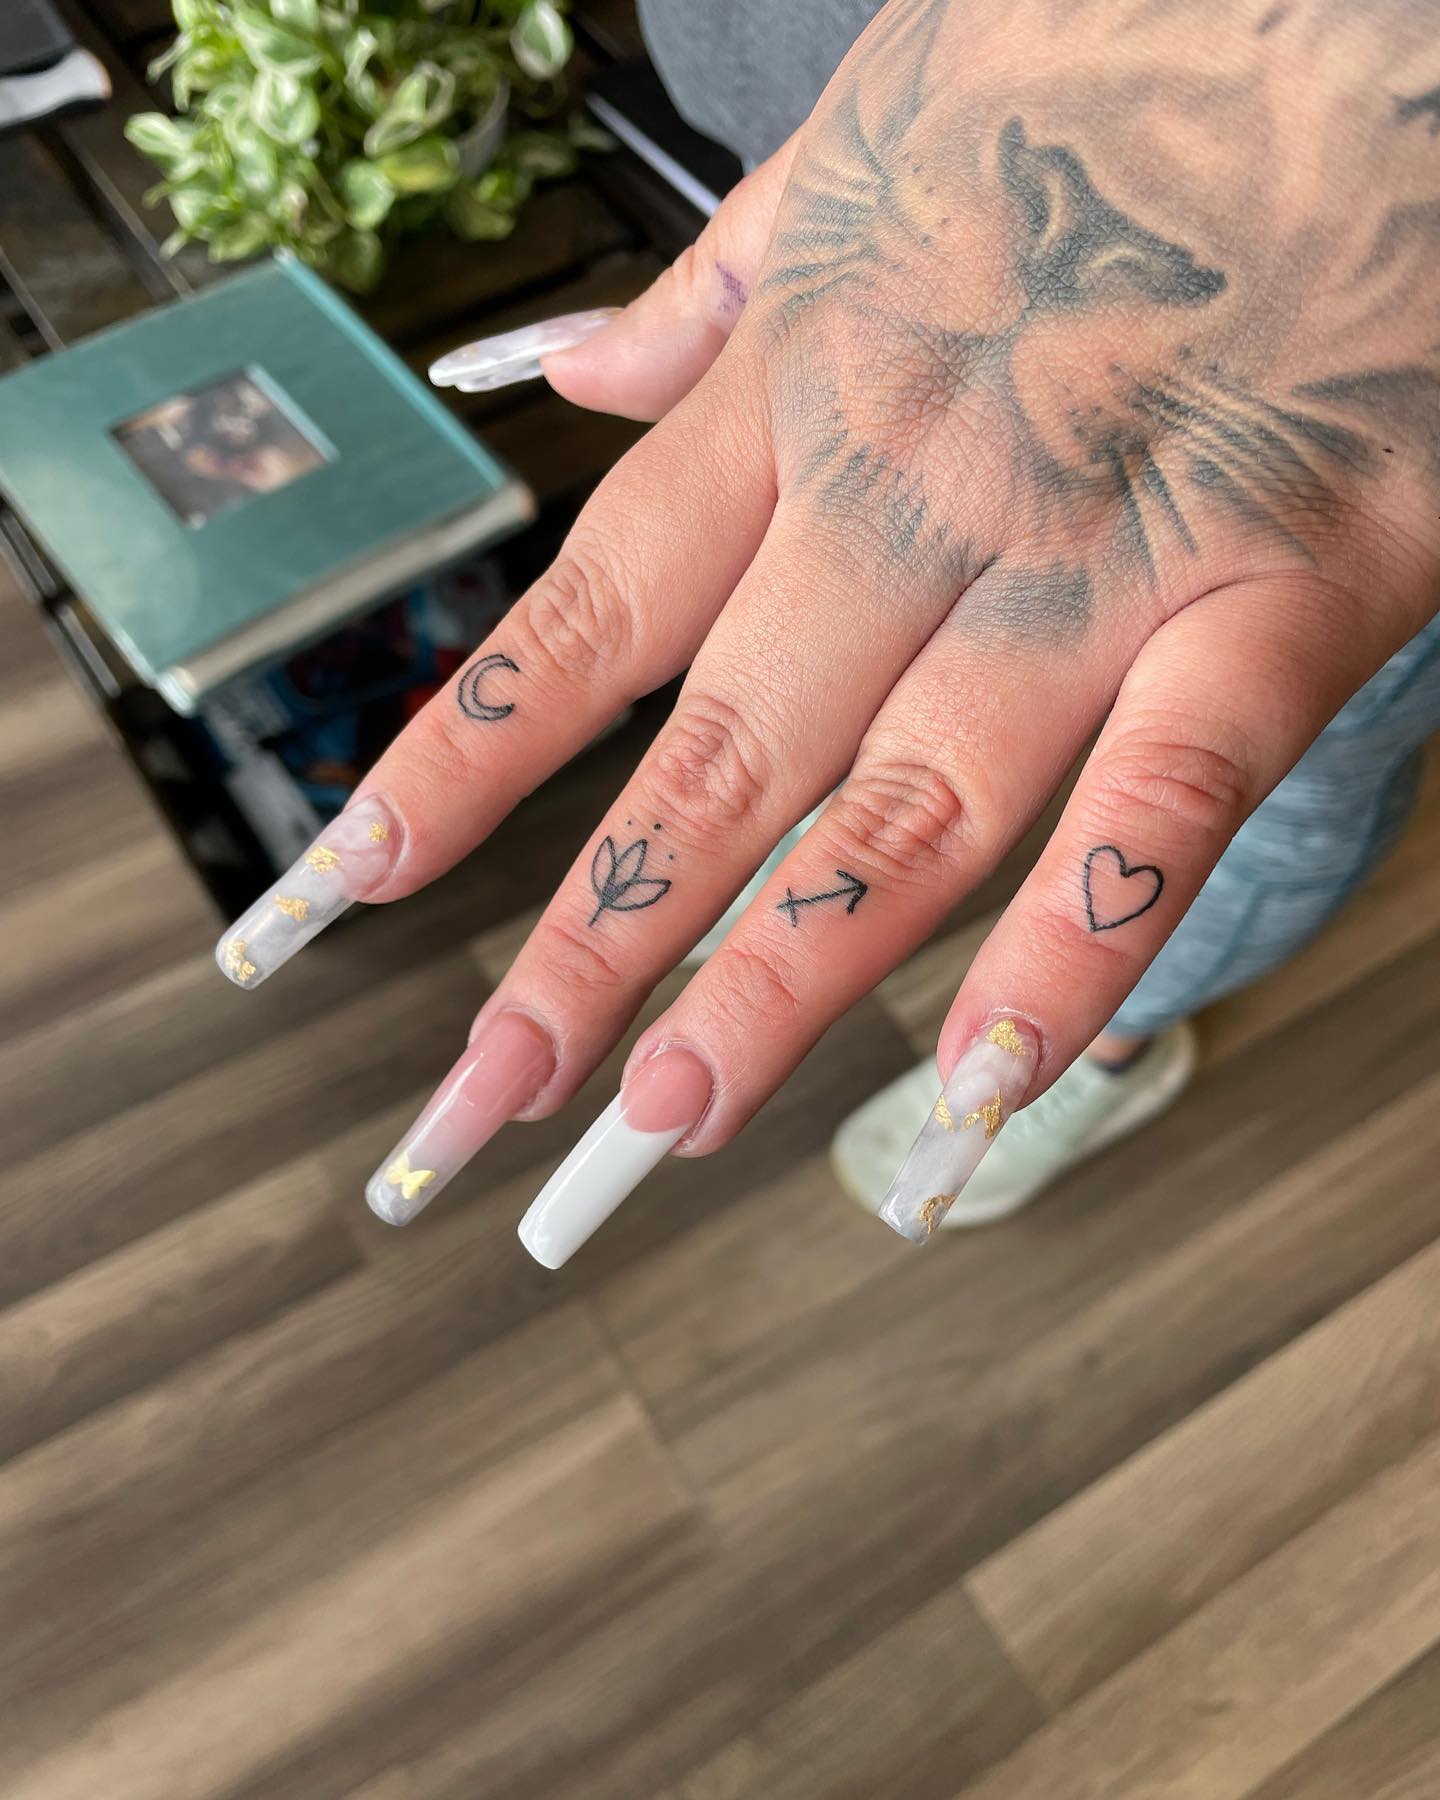 30+ Cool Finger Tattoo Ideas for Women and Men - 100 Tattoos